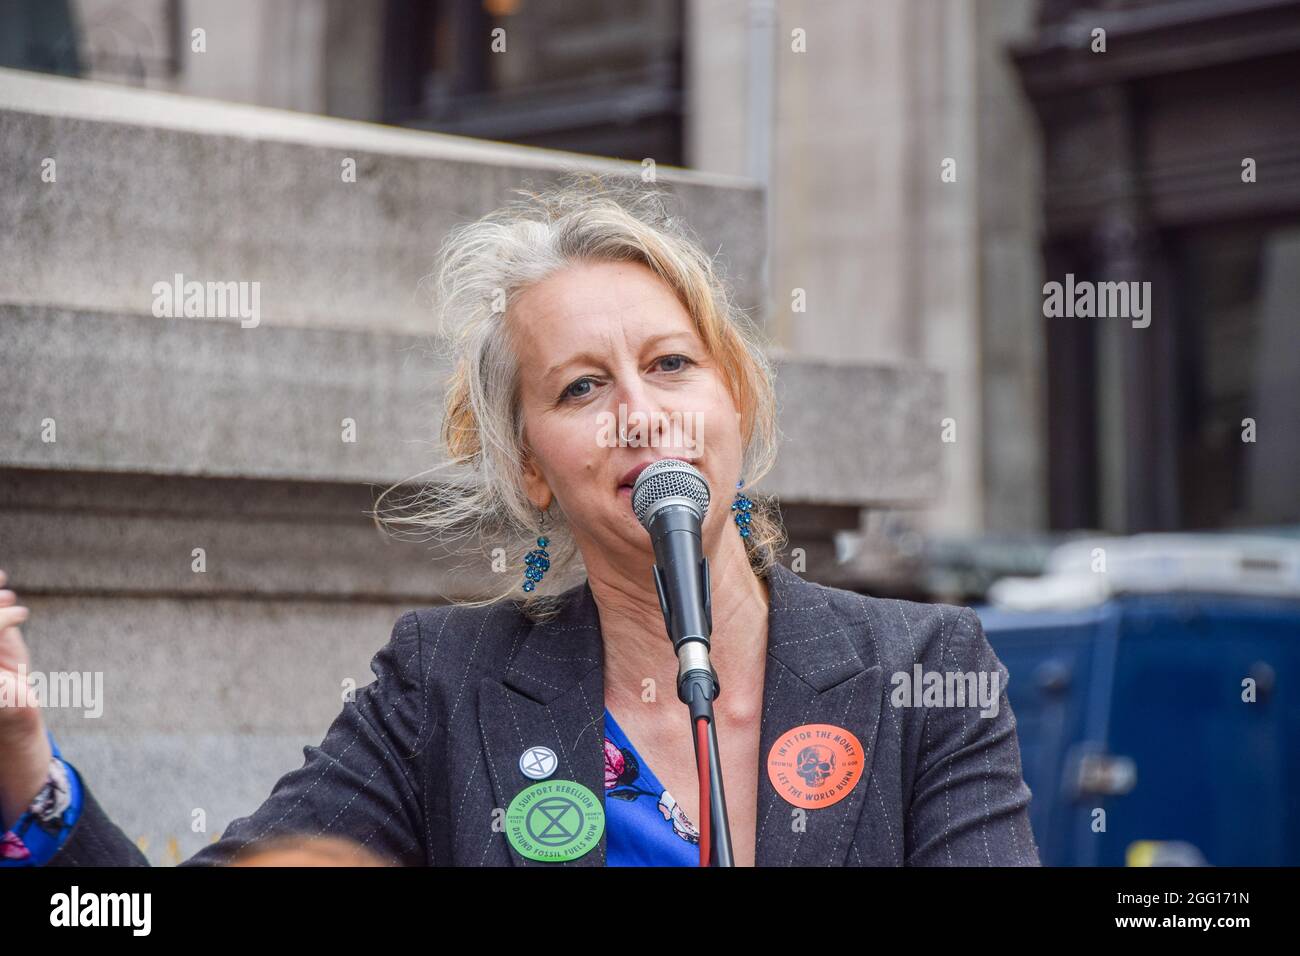 London, UK. 27th Aug, 2021. Extinction Rebellion co-founder Gail Bradbrook speaks to the protesters outside The Royal Exchange during the demonstration. Extinction Rebellion protesters staged the Blood Money March, part of their two-week Impossible Rebellion campaign, targeting the City of London, the capital's financial hub. (Photo by Vuk Valcic/SOPA Images/Sipa USA) Credit: Sipa USA/Alamy Live News Stock Photo